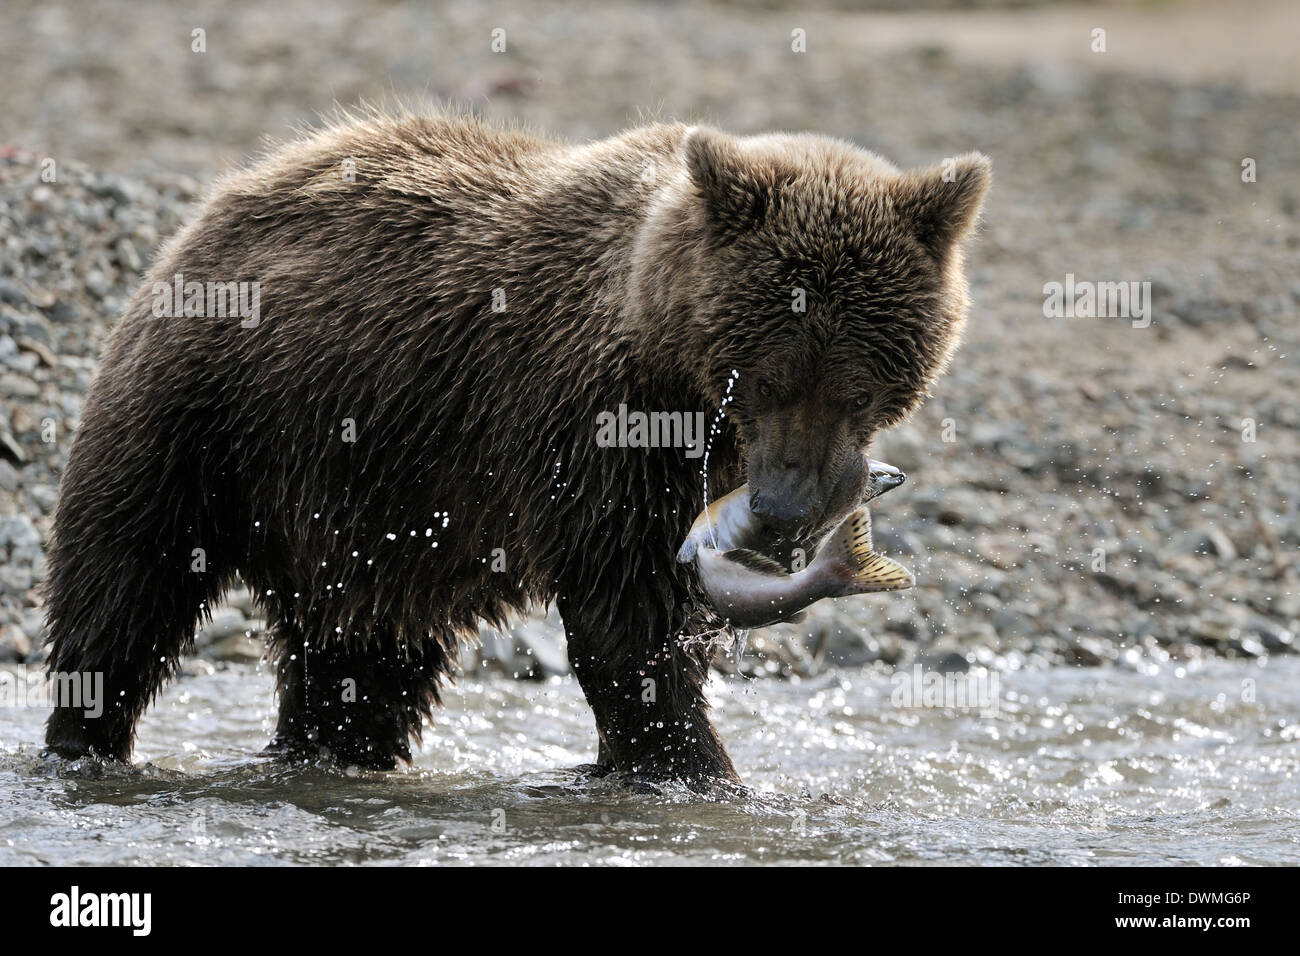 Grizzly bear (Ursus arctos horribilis) with fresh caught fish in mouth with seamen coming out, Katmai national park, Alaska, USA Stock Photo